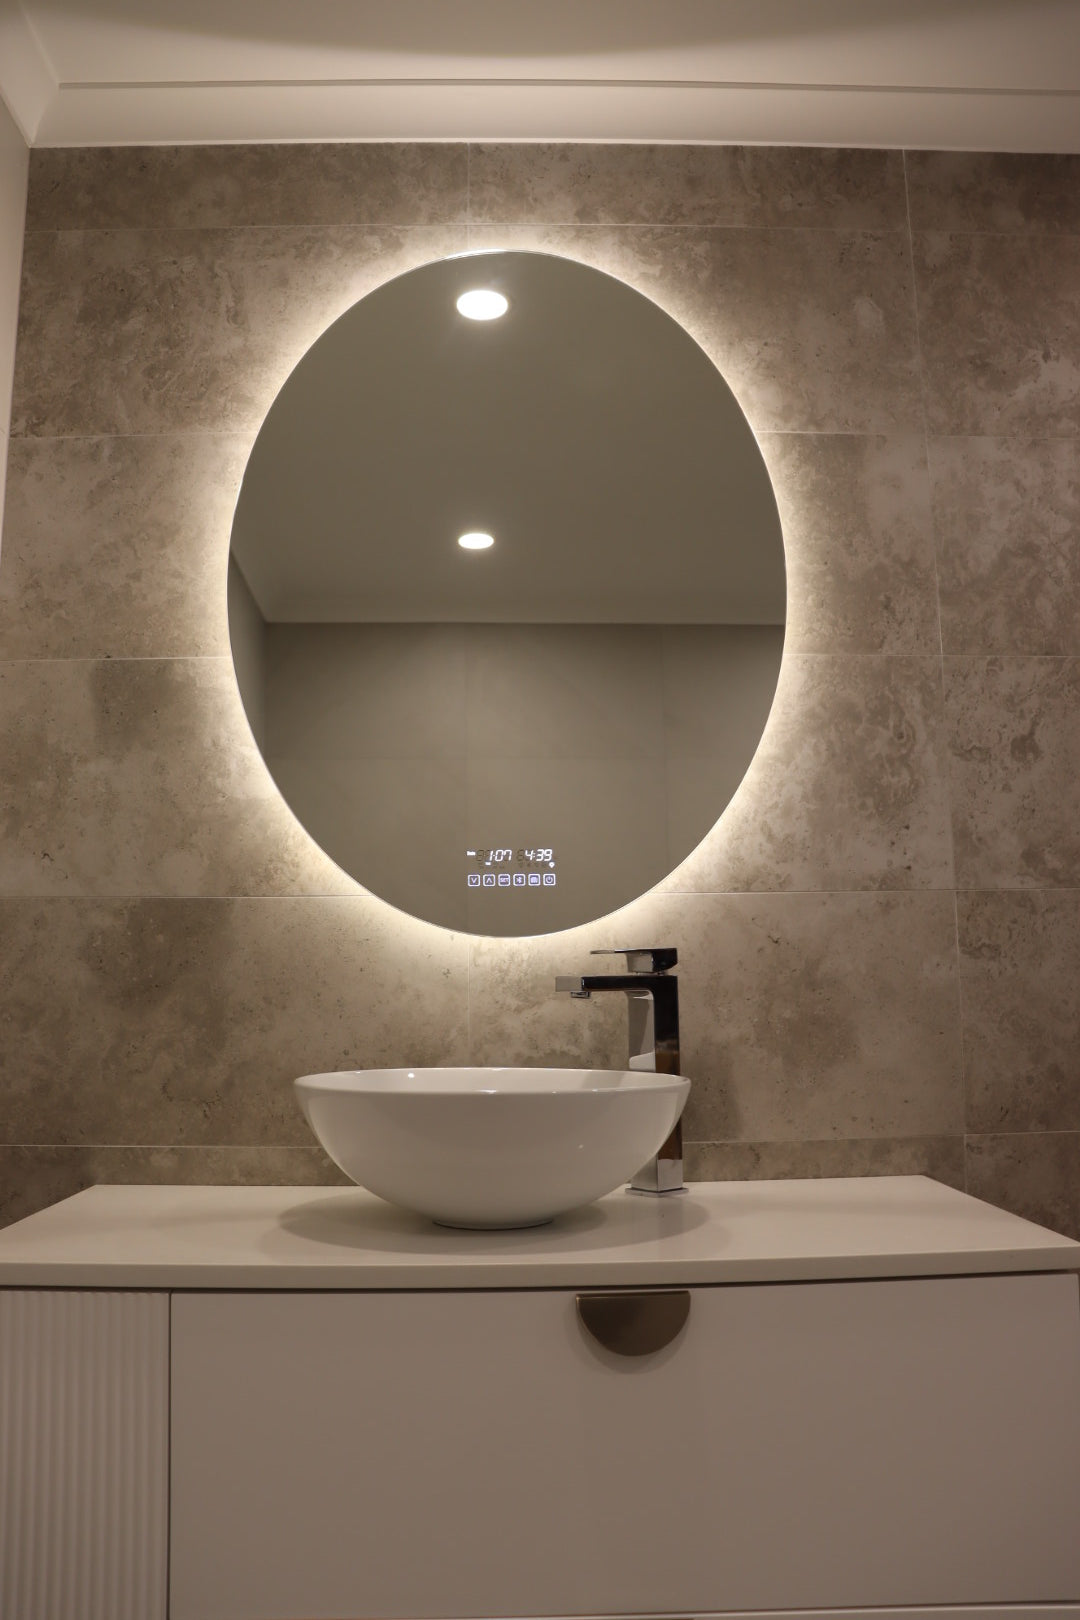 Inviting Bathroom Vanity Space with Warm White Light from Smart LED Mirror on Greyish Brown Wall